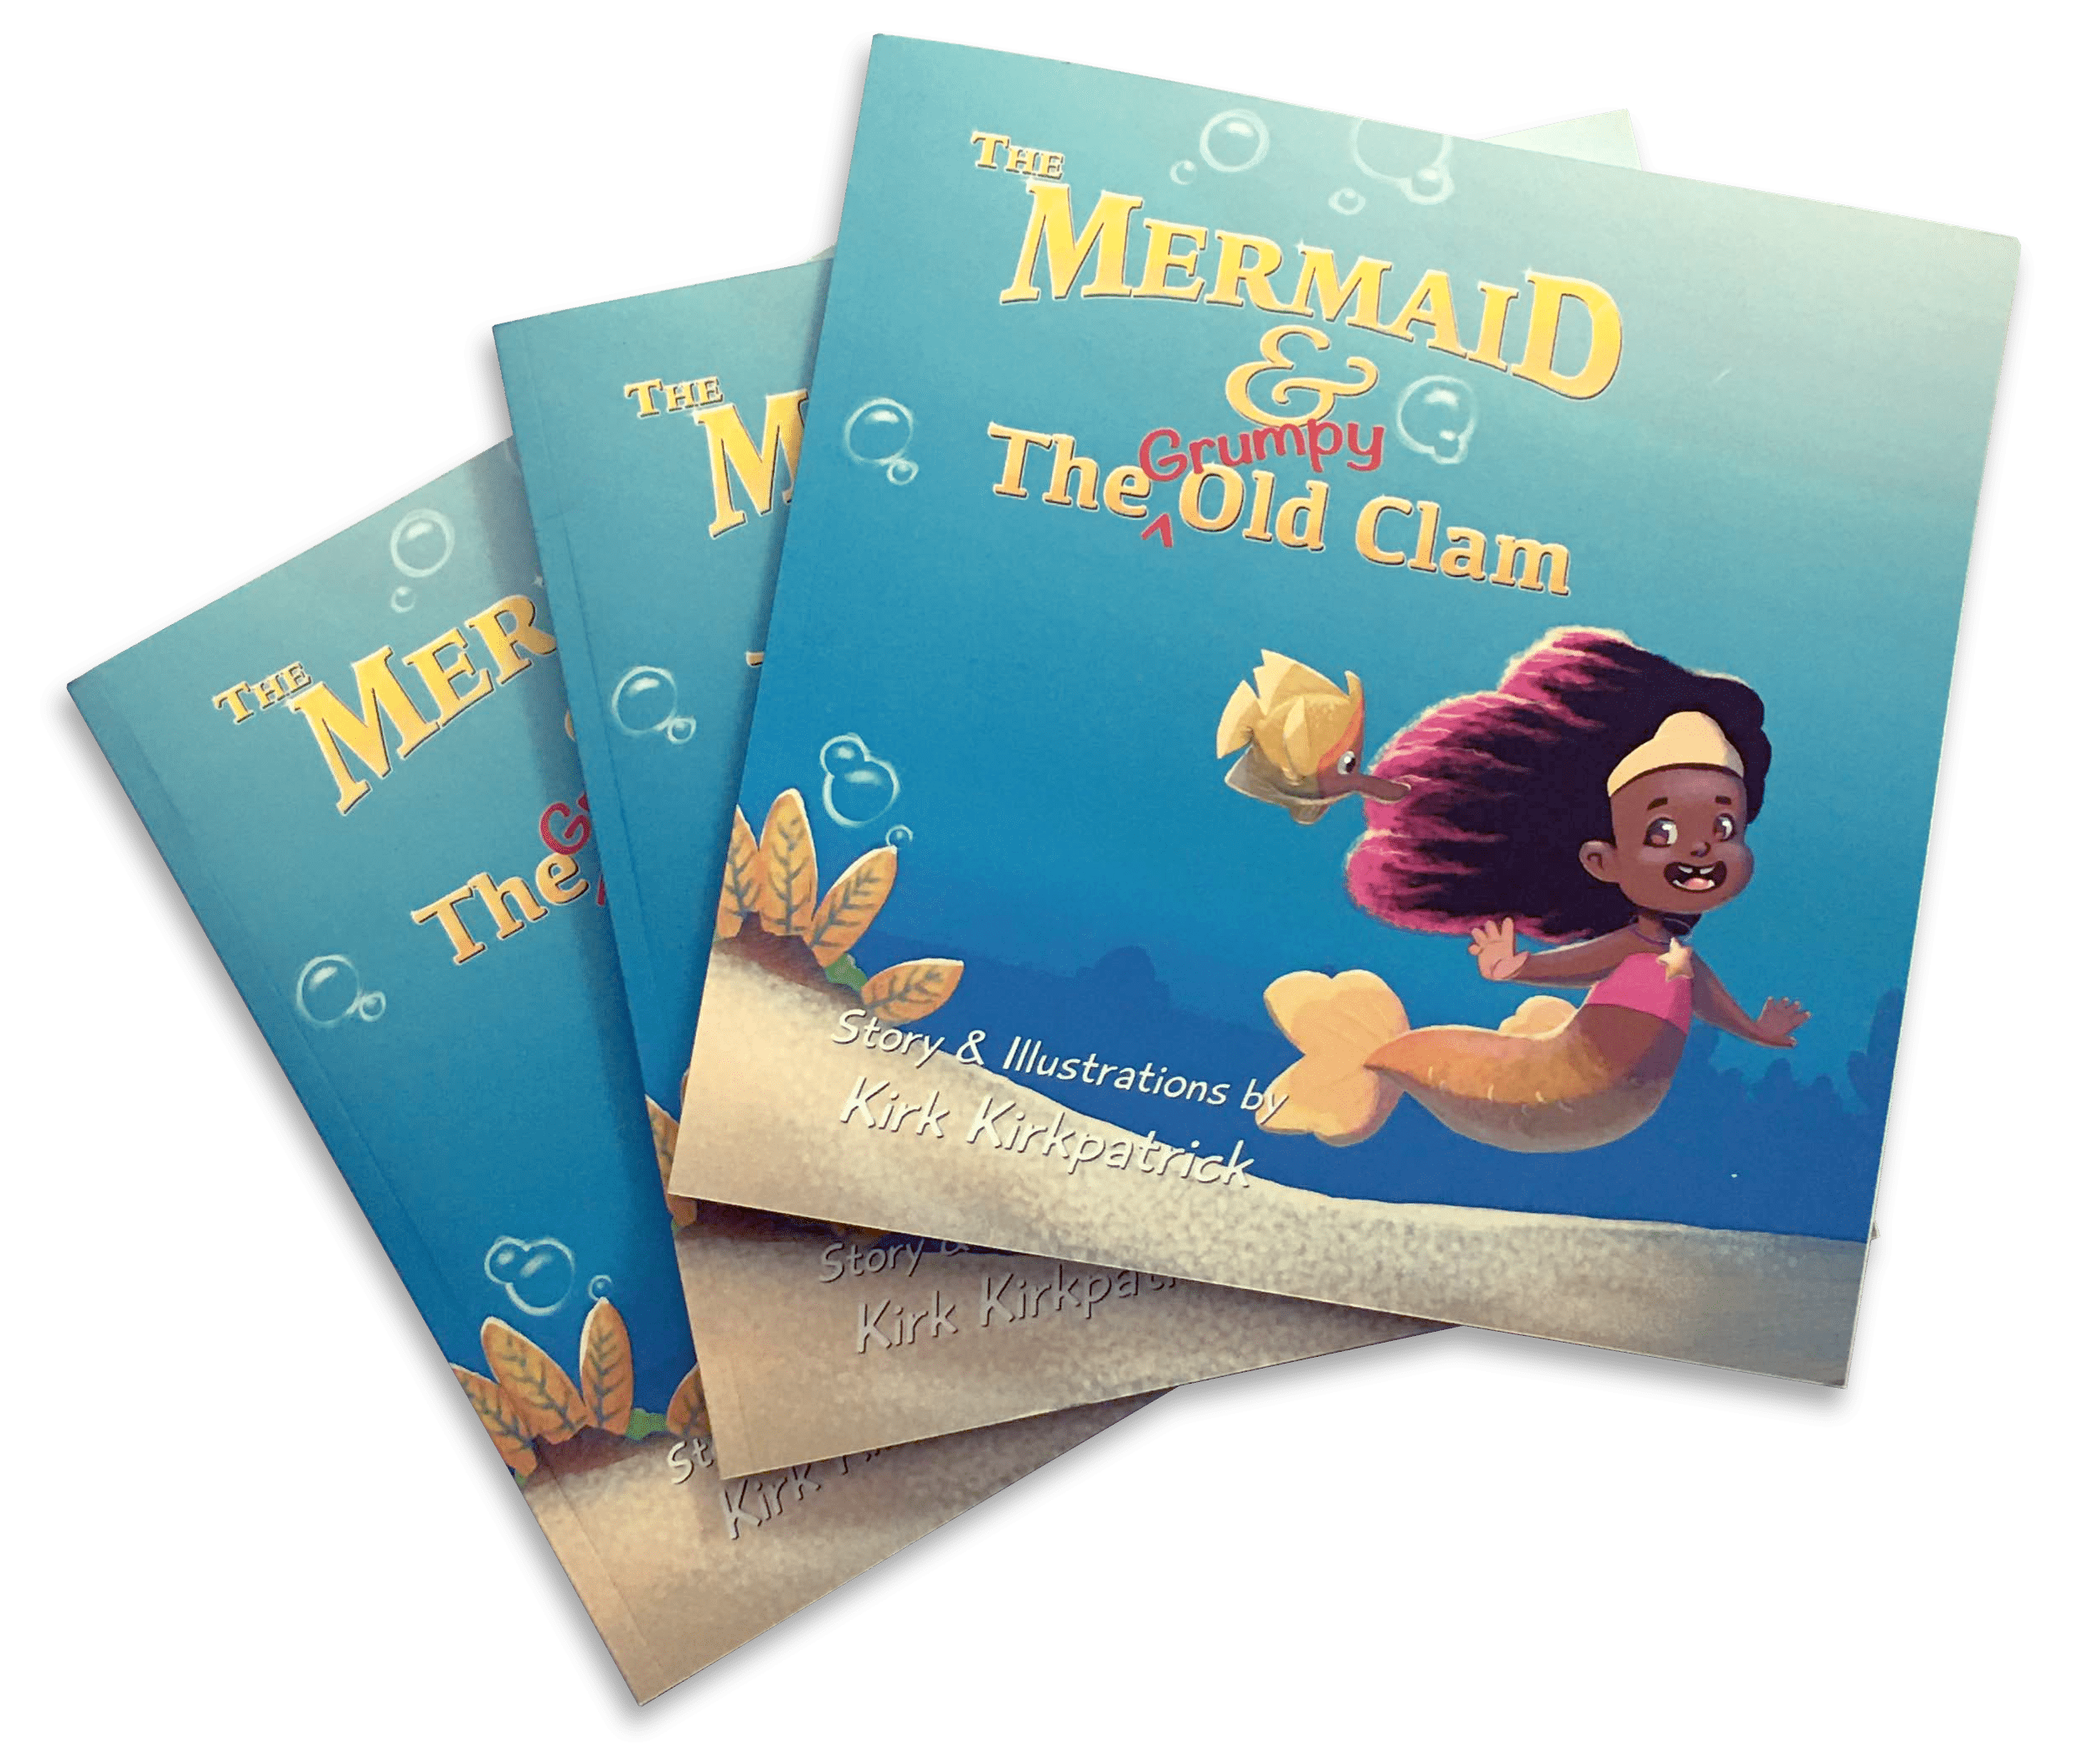 Professional Illustration for Children's Books, Games, and Education - Mermaid Books png